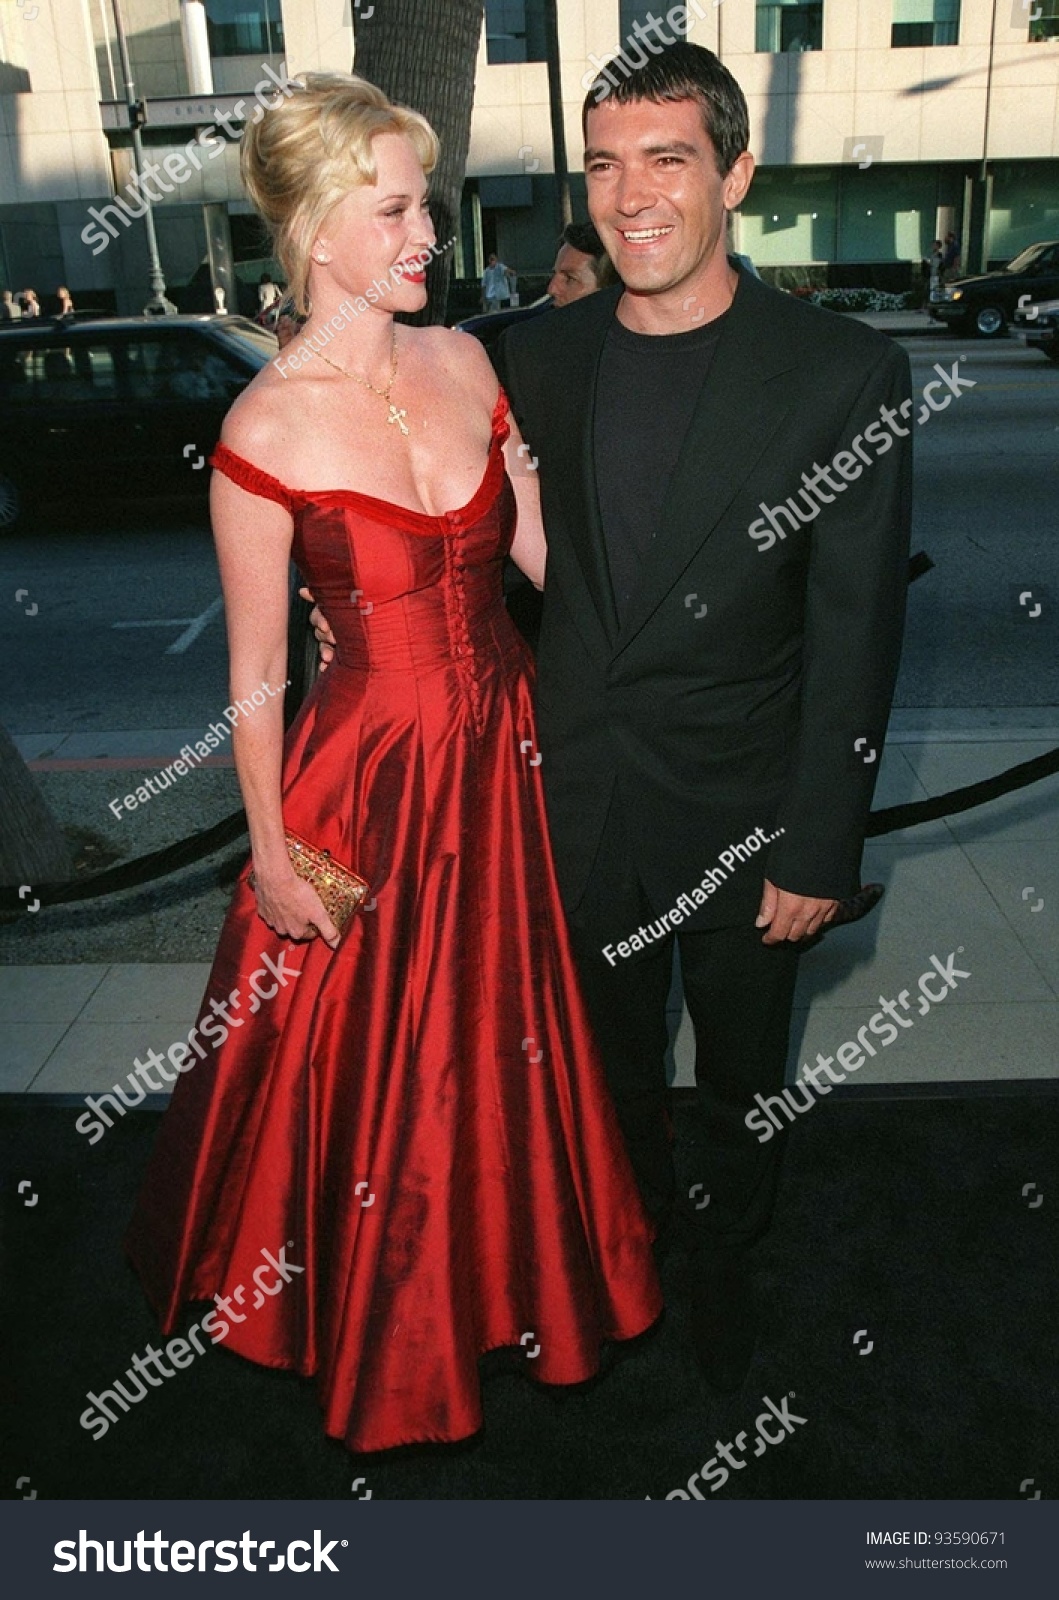 10jul98: Actor Antonio Banderas & Actress Wife Melanie Griffith At The World Premiere ...1059 x 1600